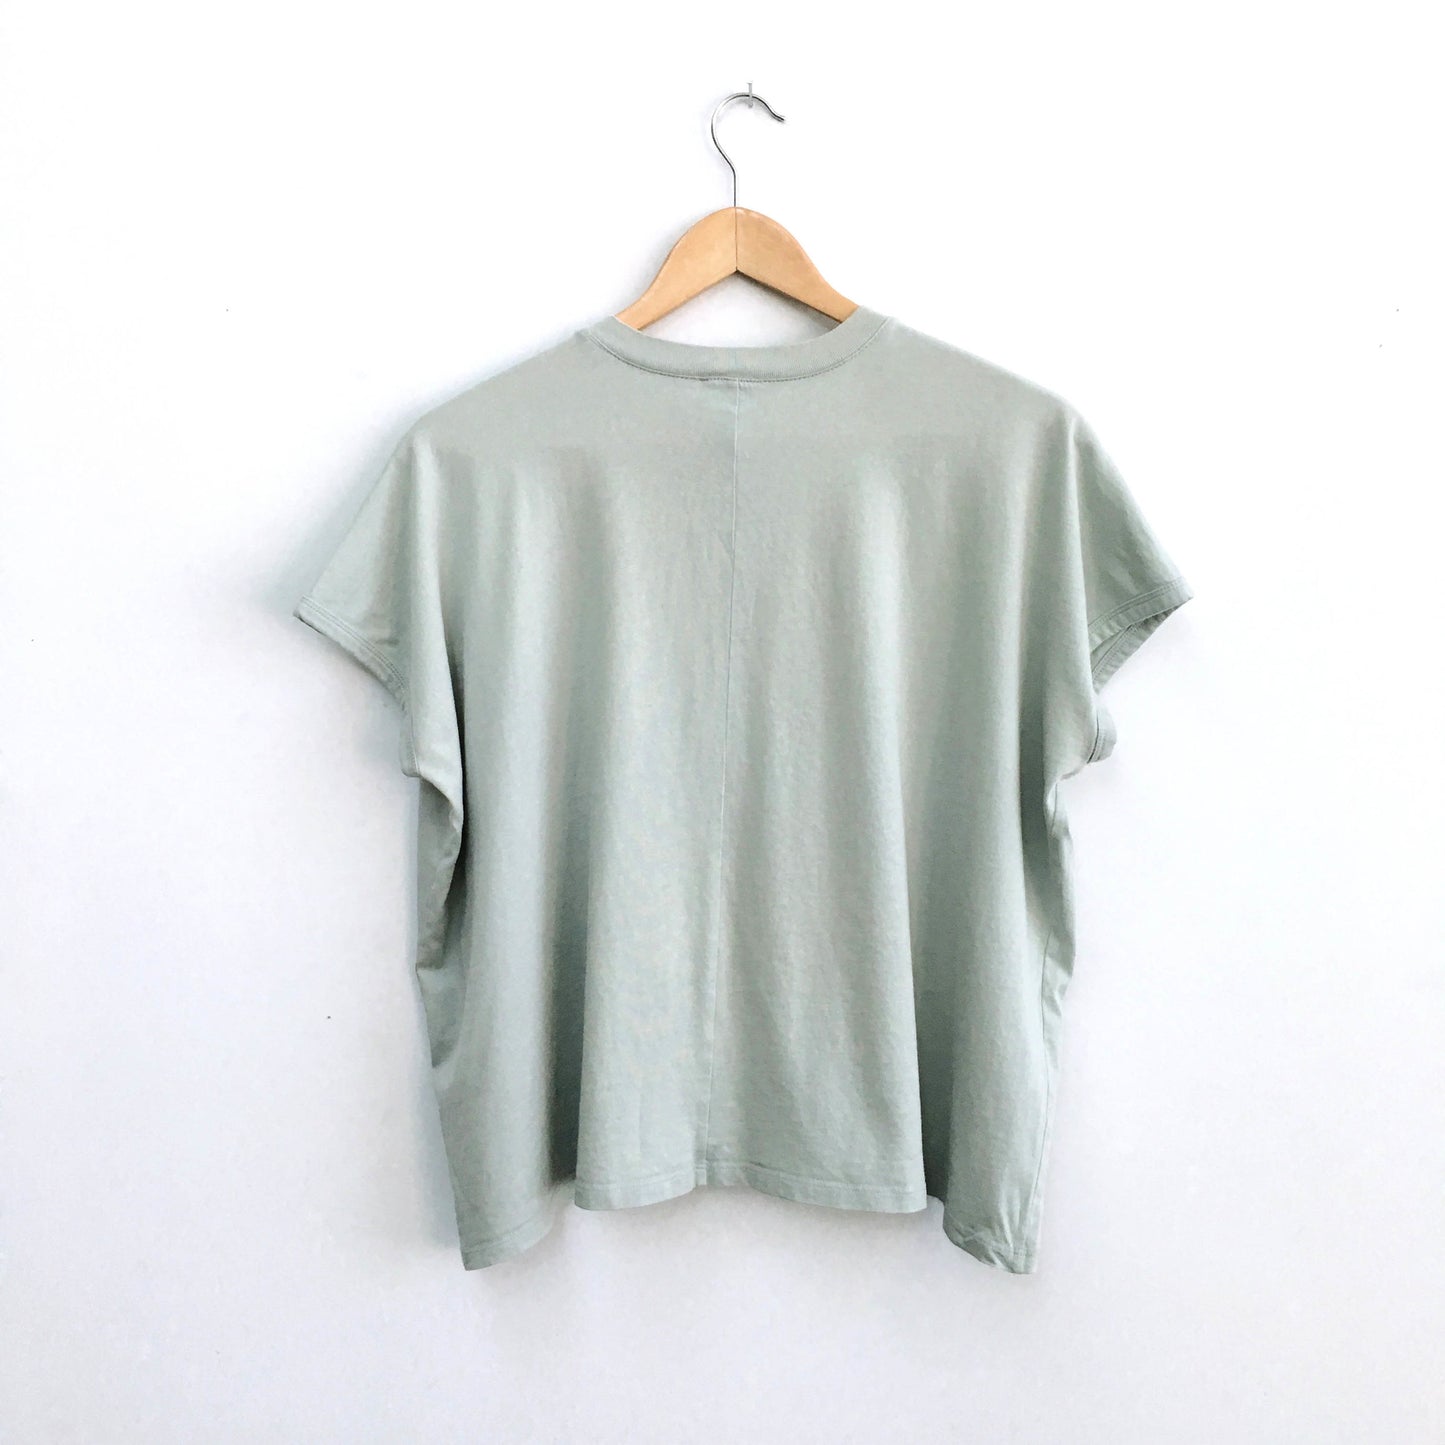 Wilfred Box Tee - size Small